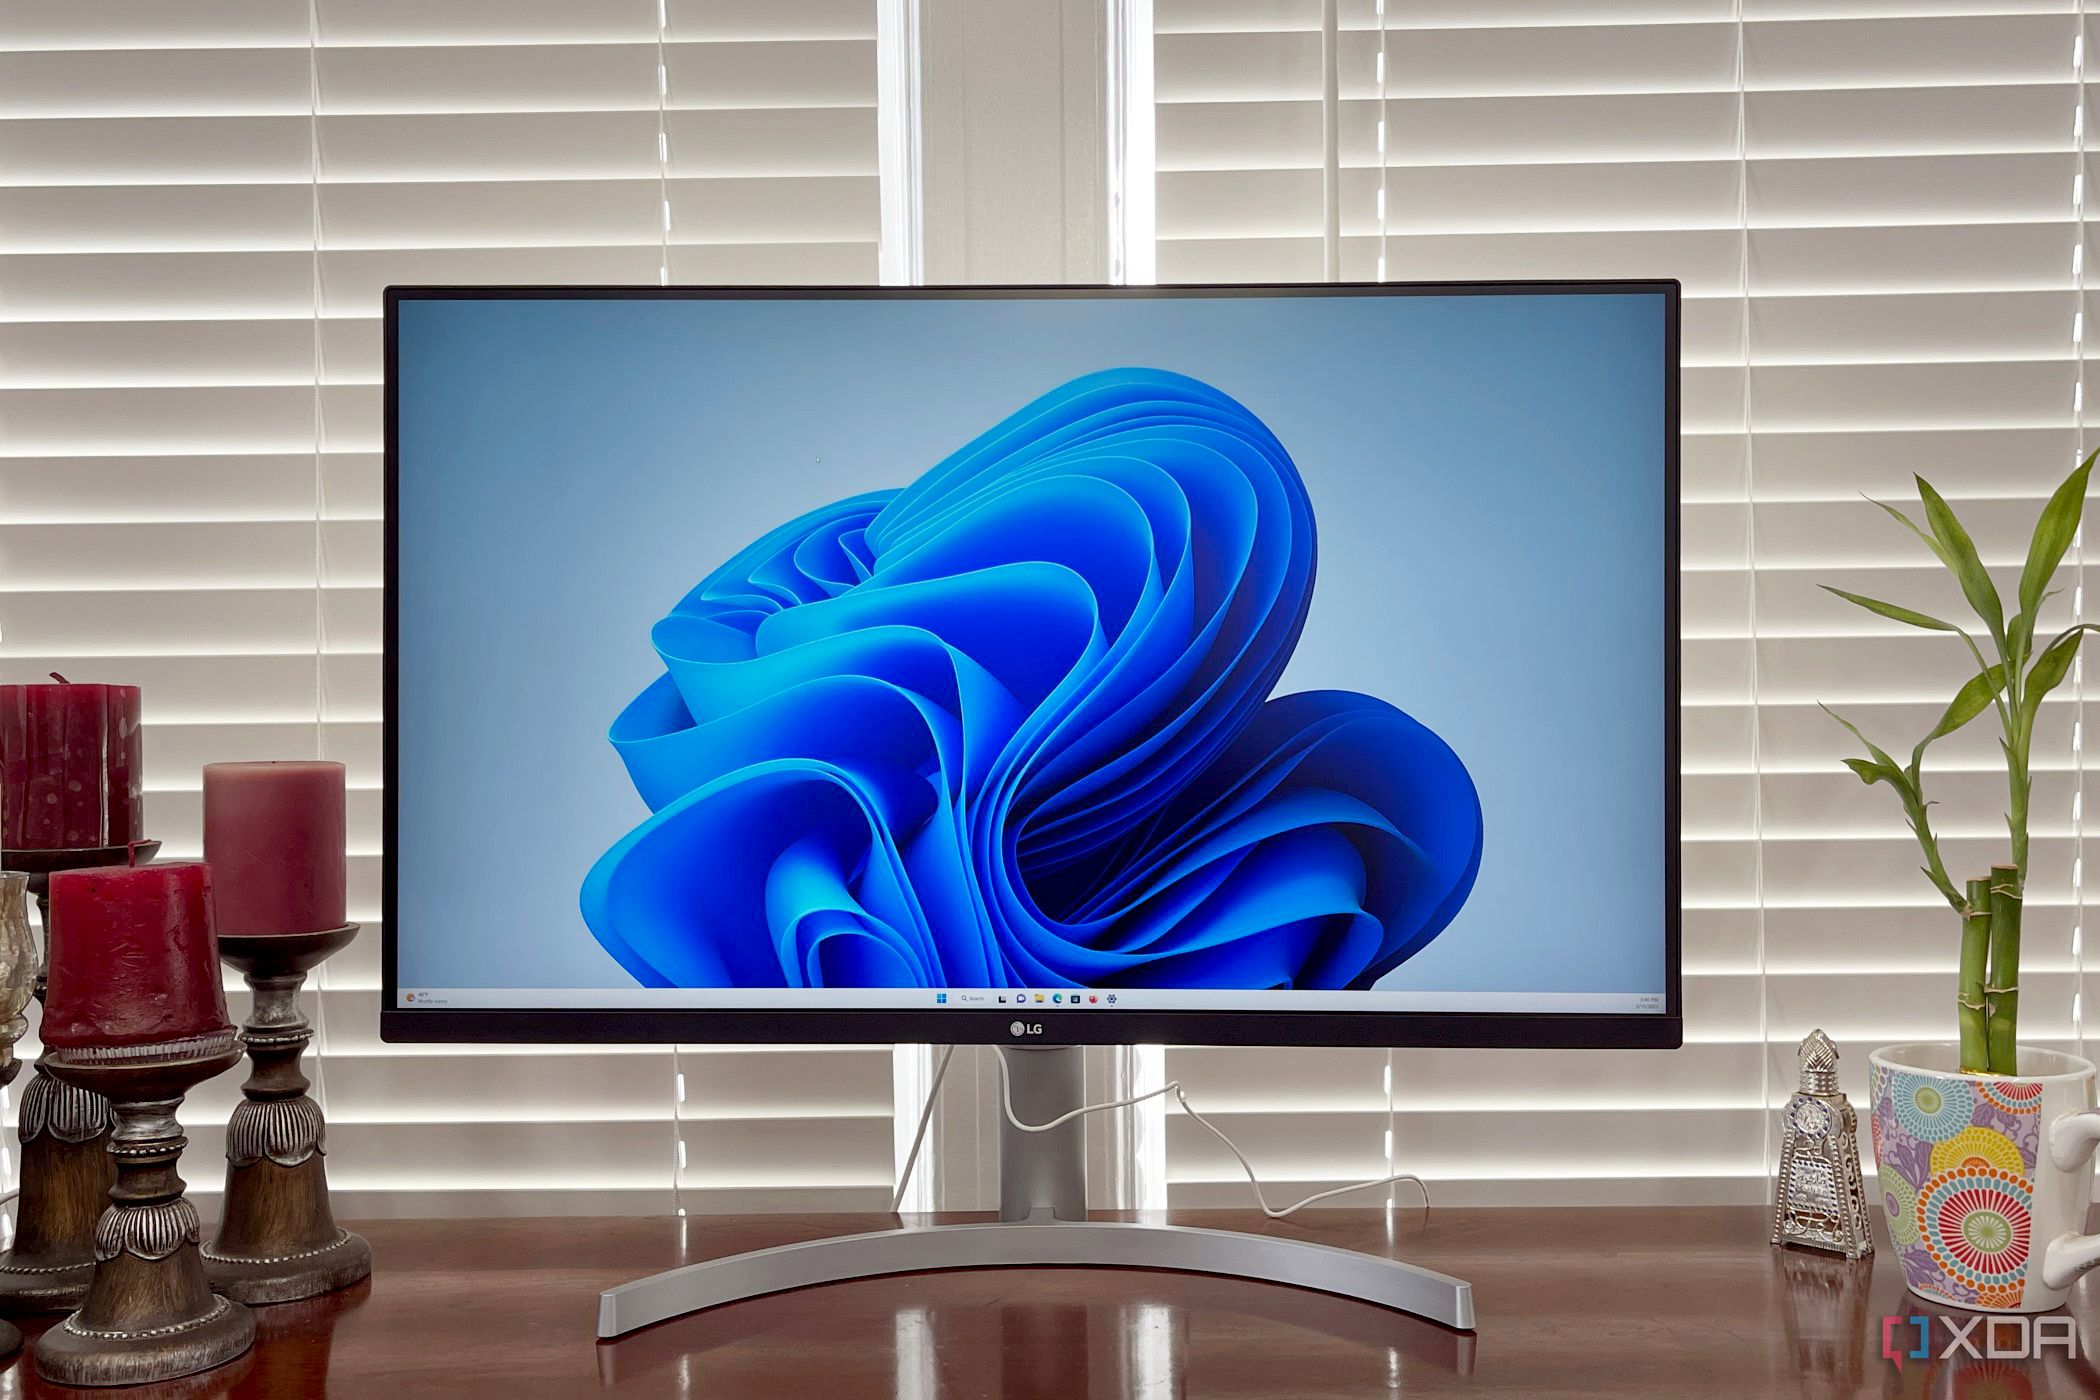 LG UltraFine 32UN650W review: Affordable 4K monitor with high-end features